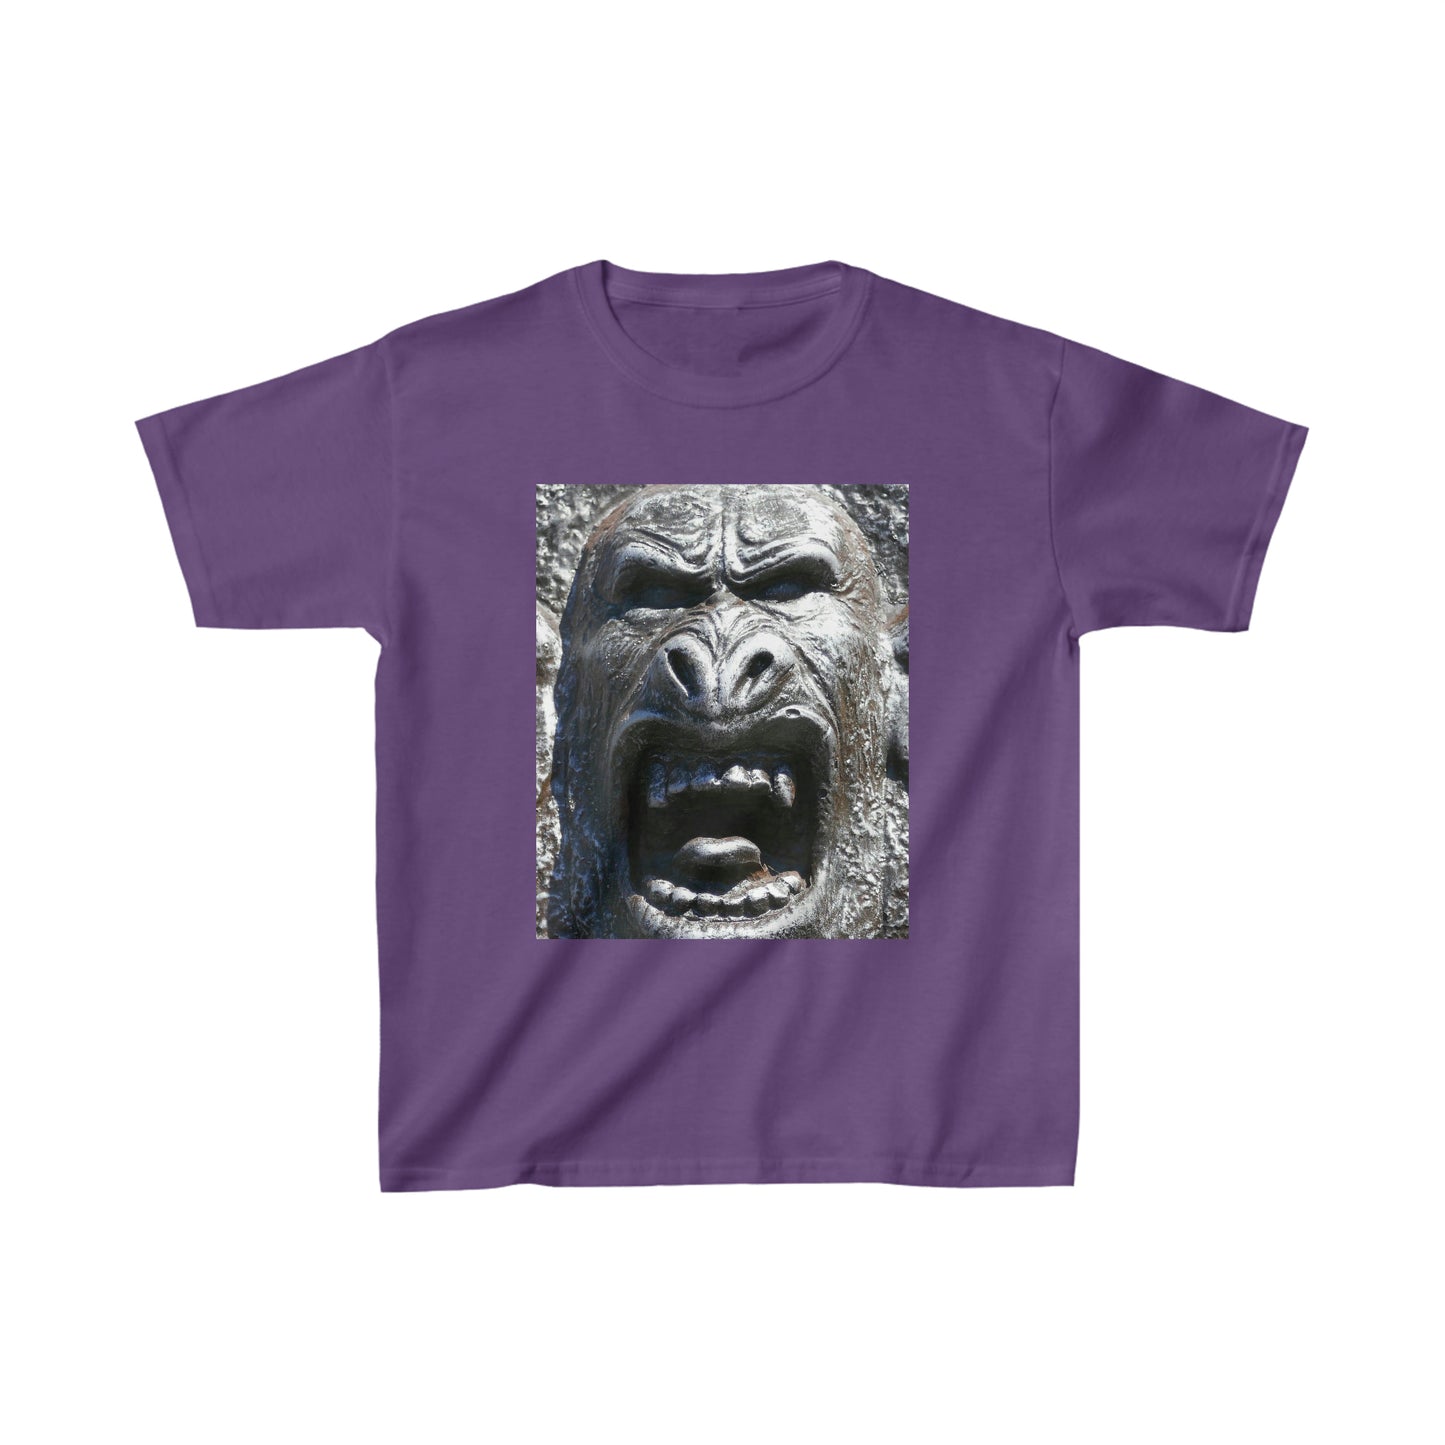 Frenzy Scream - Kids Cotton Tee - Fry1Productions